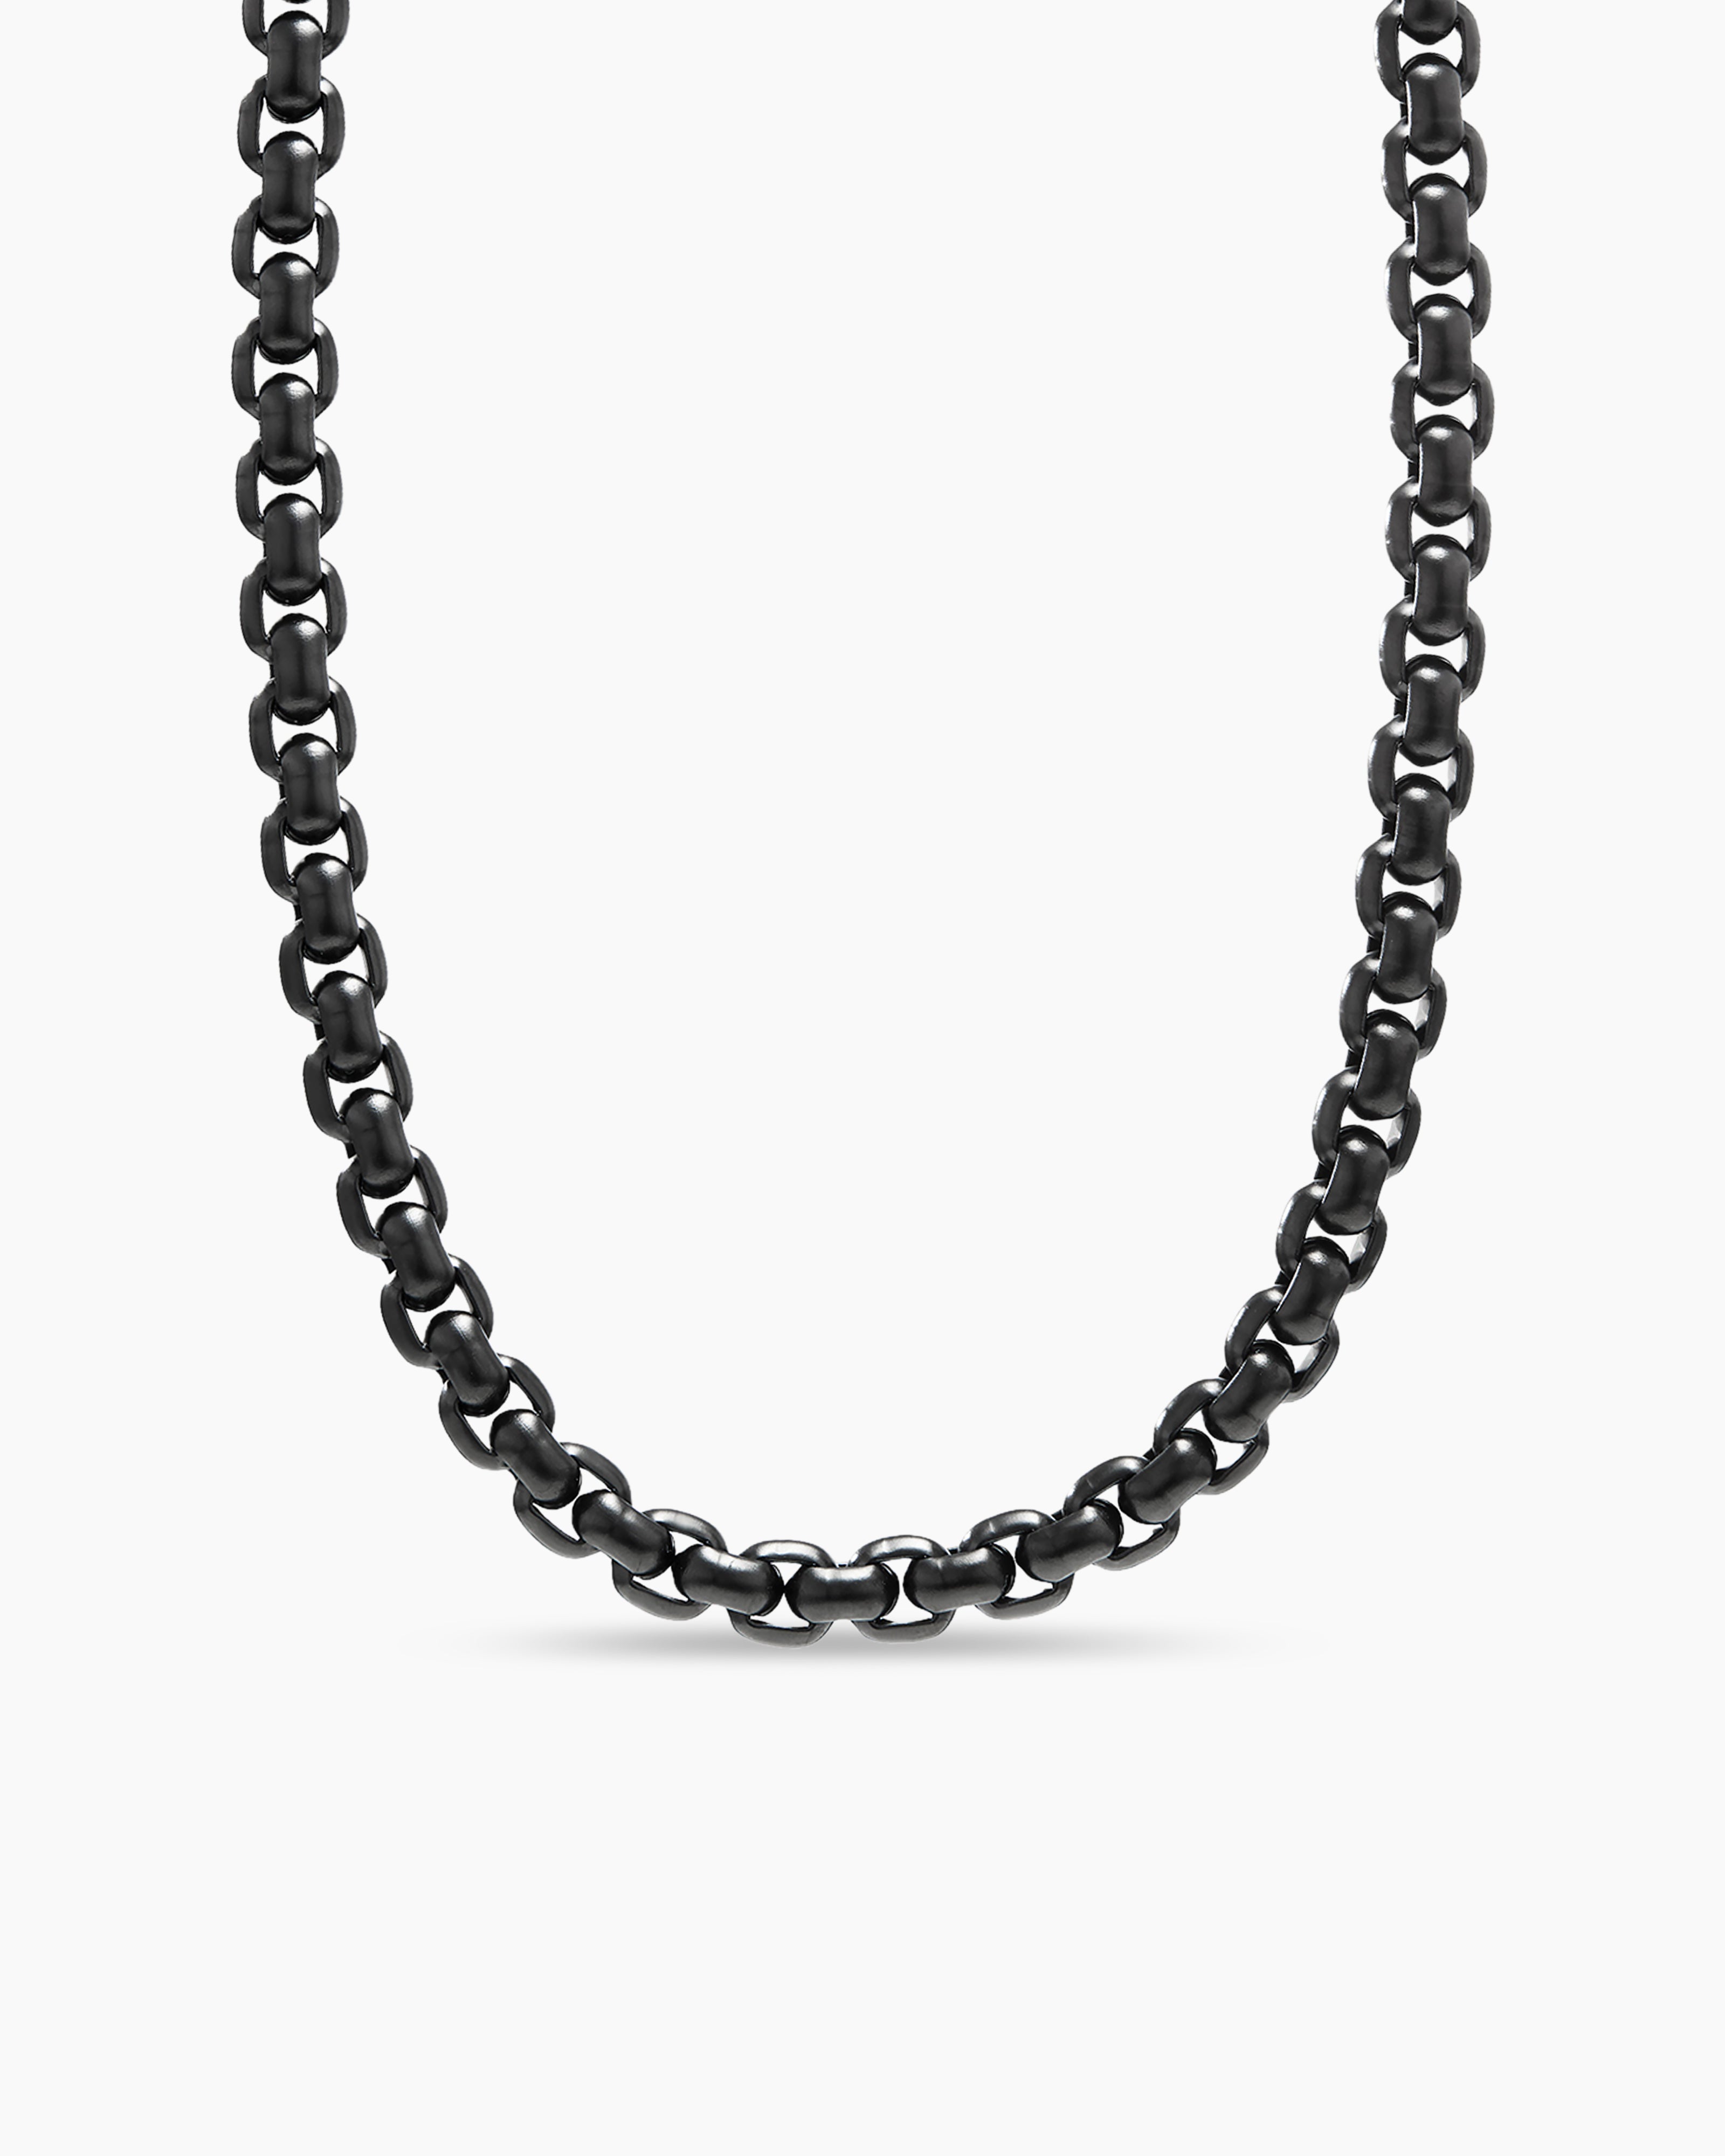 Buy Silver Stainless Steel 3mm Boston Link Chain Online - Inox Jewelry India